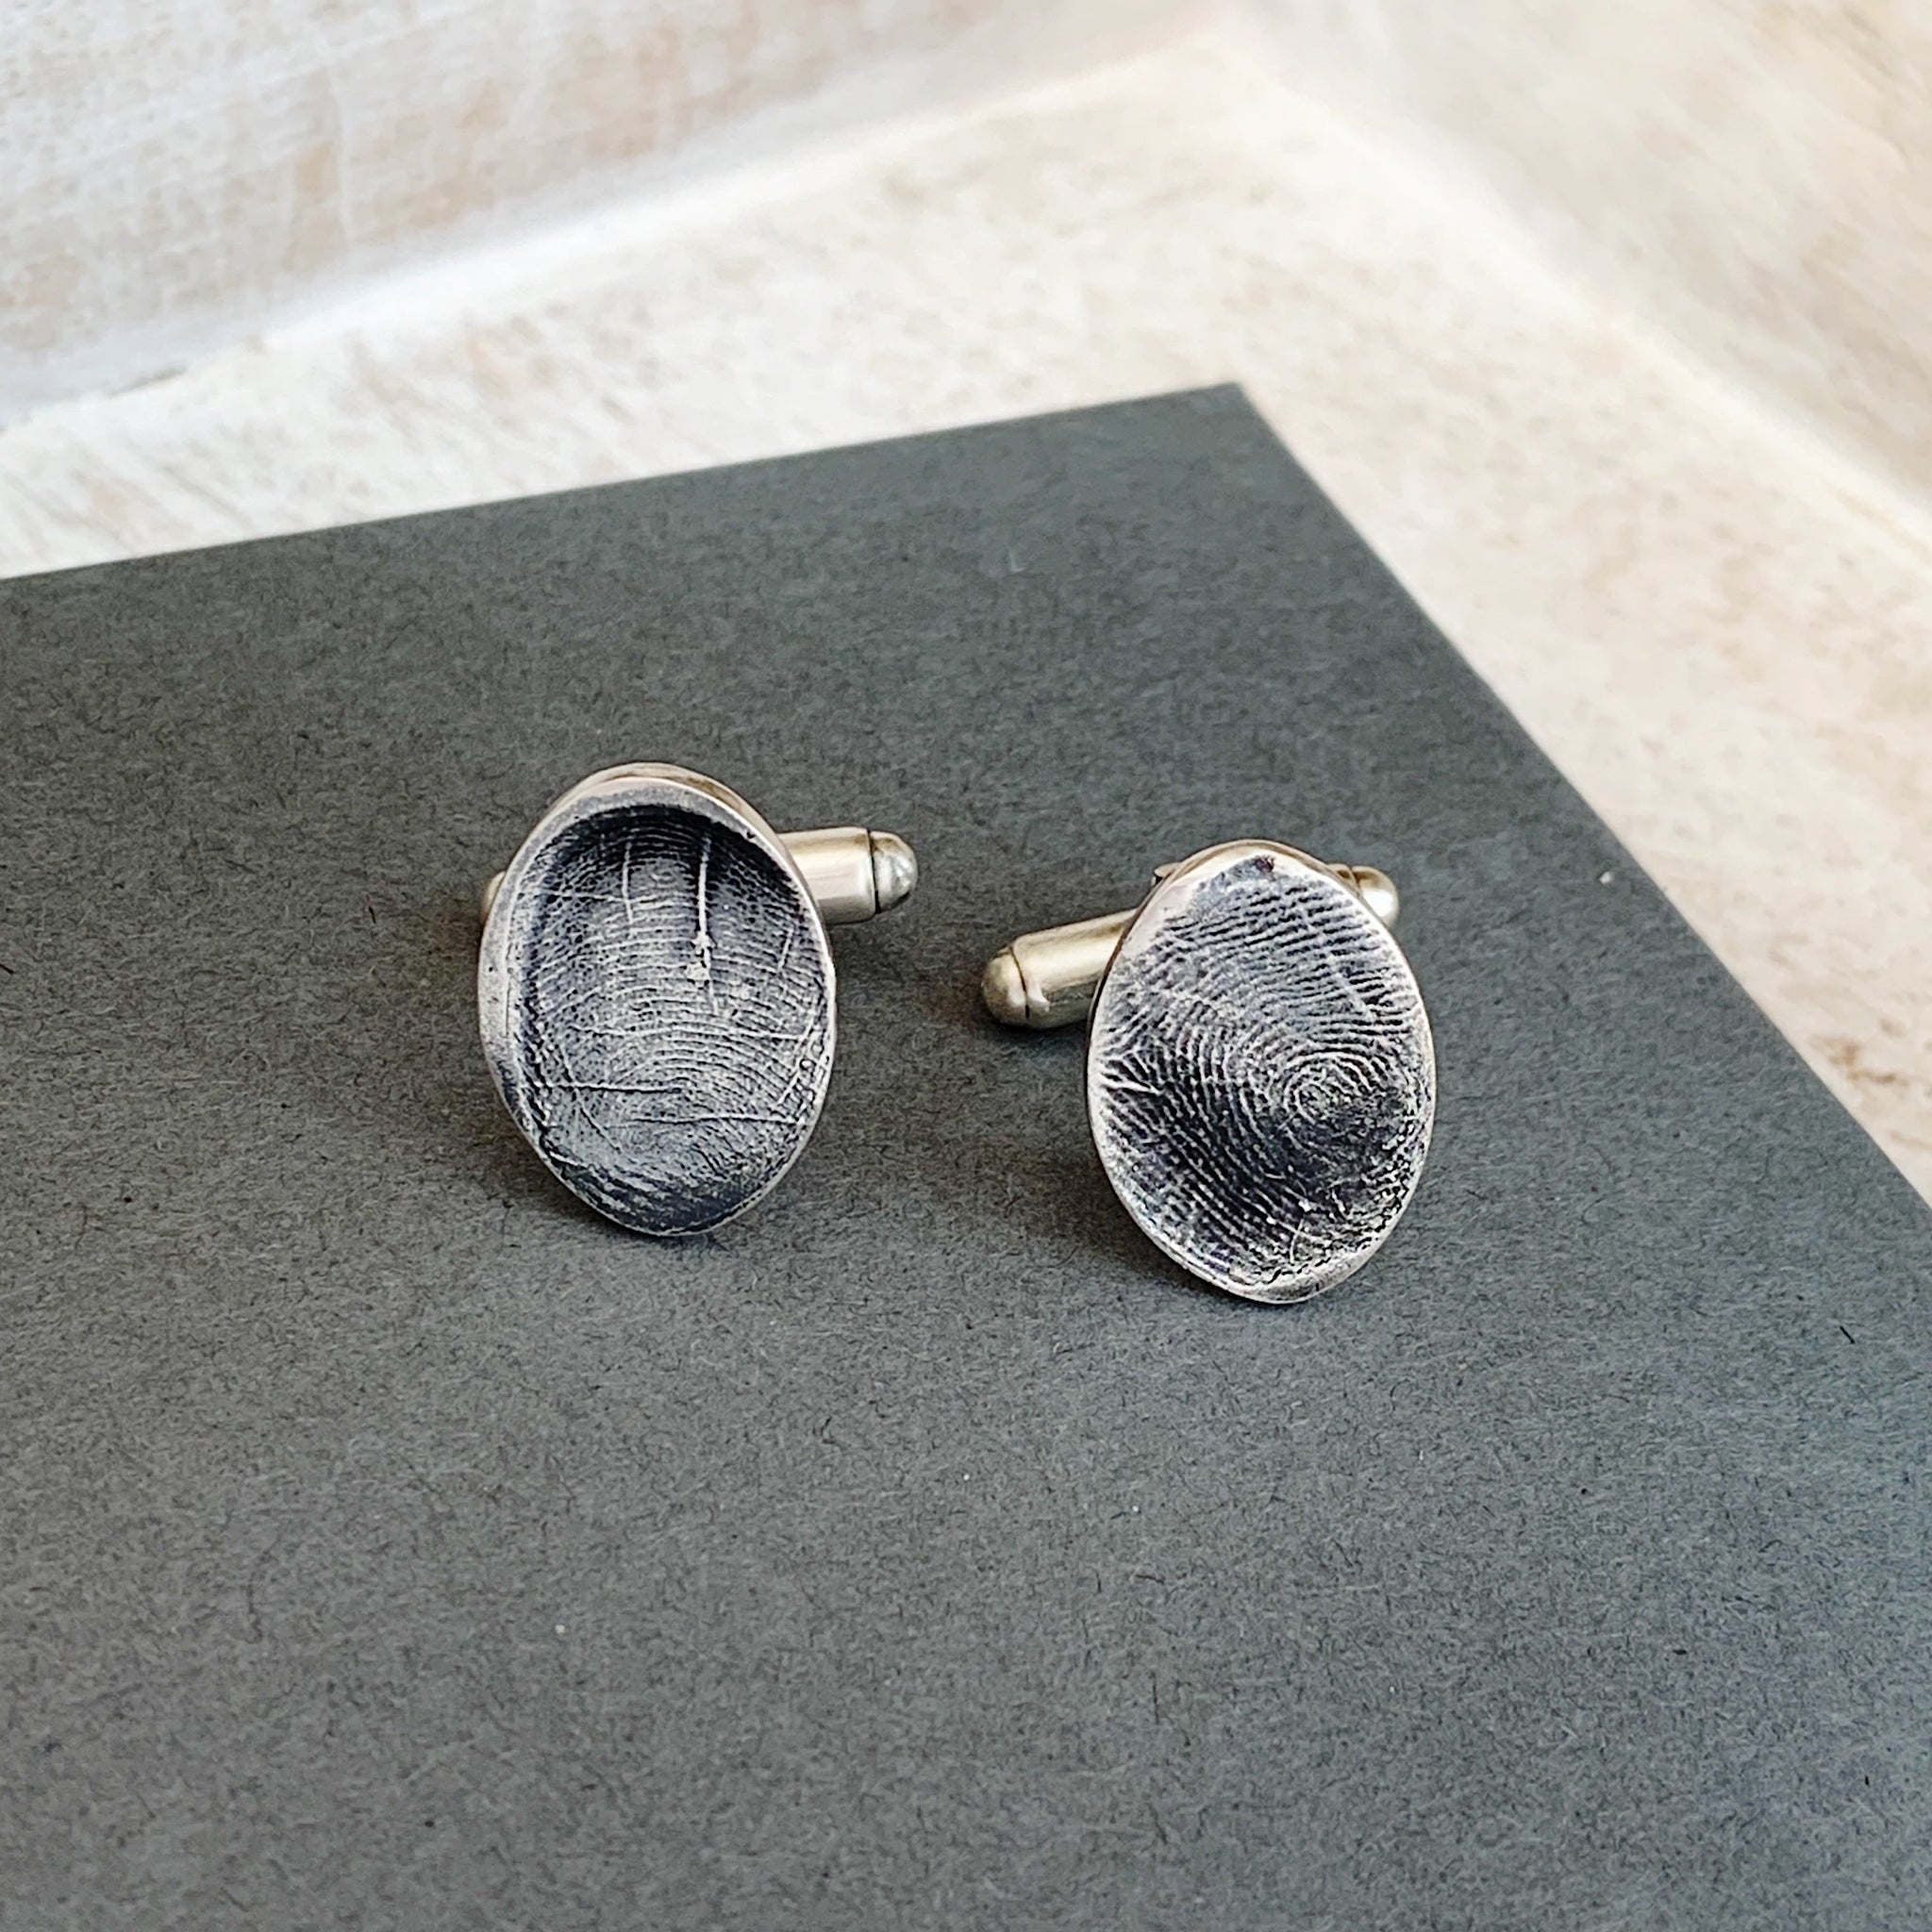 These cufflinks have been made with the print from a silicon mould